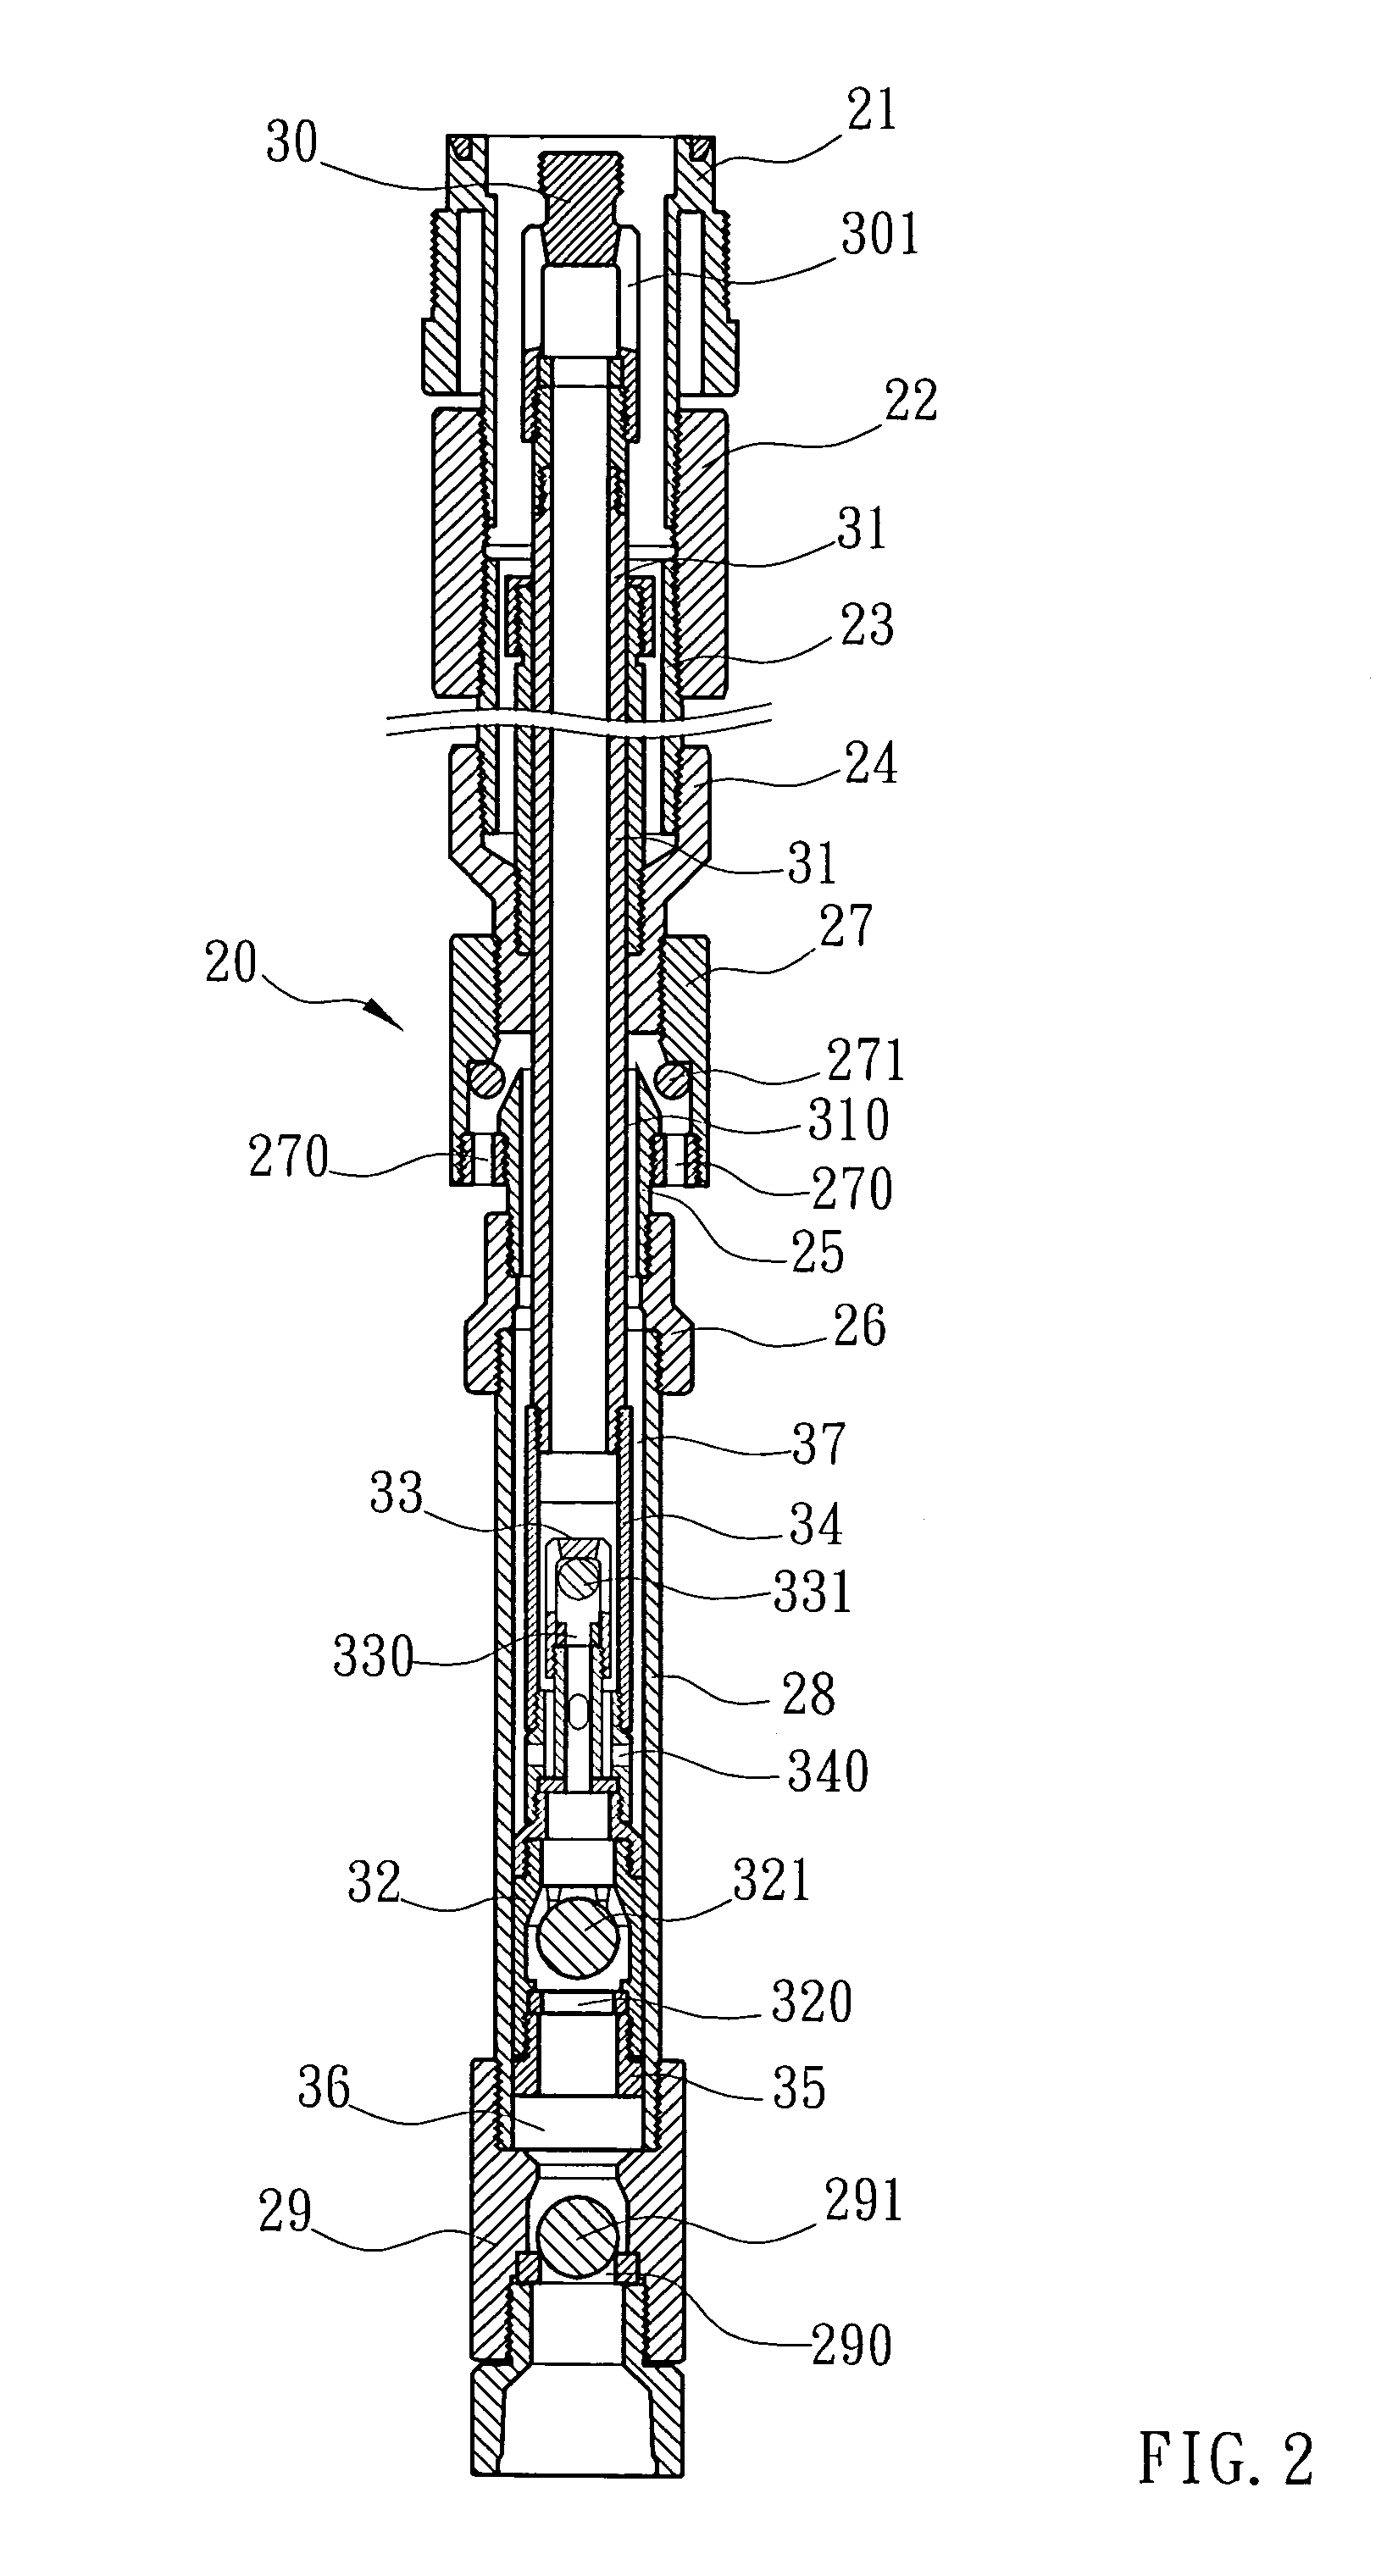 Oil pumping unit using an electrical submersible pump driven by a circular linear synchronous three-phase motor with rare earth permanent magnet